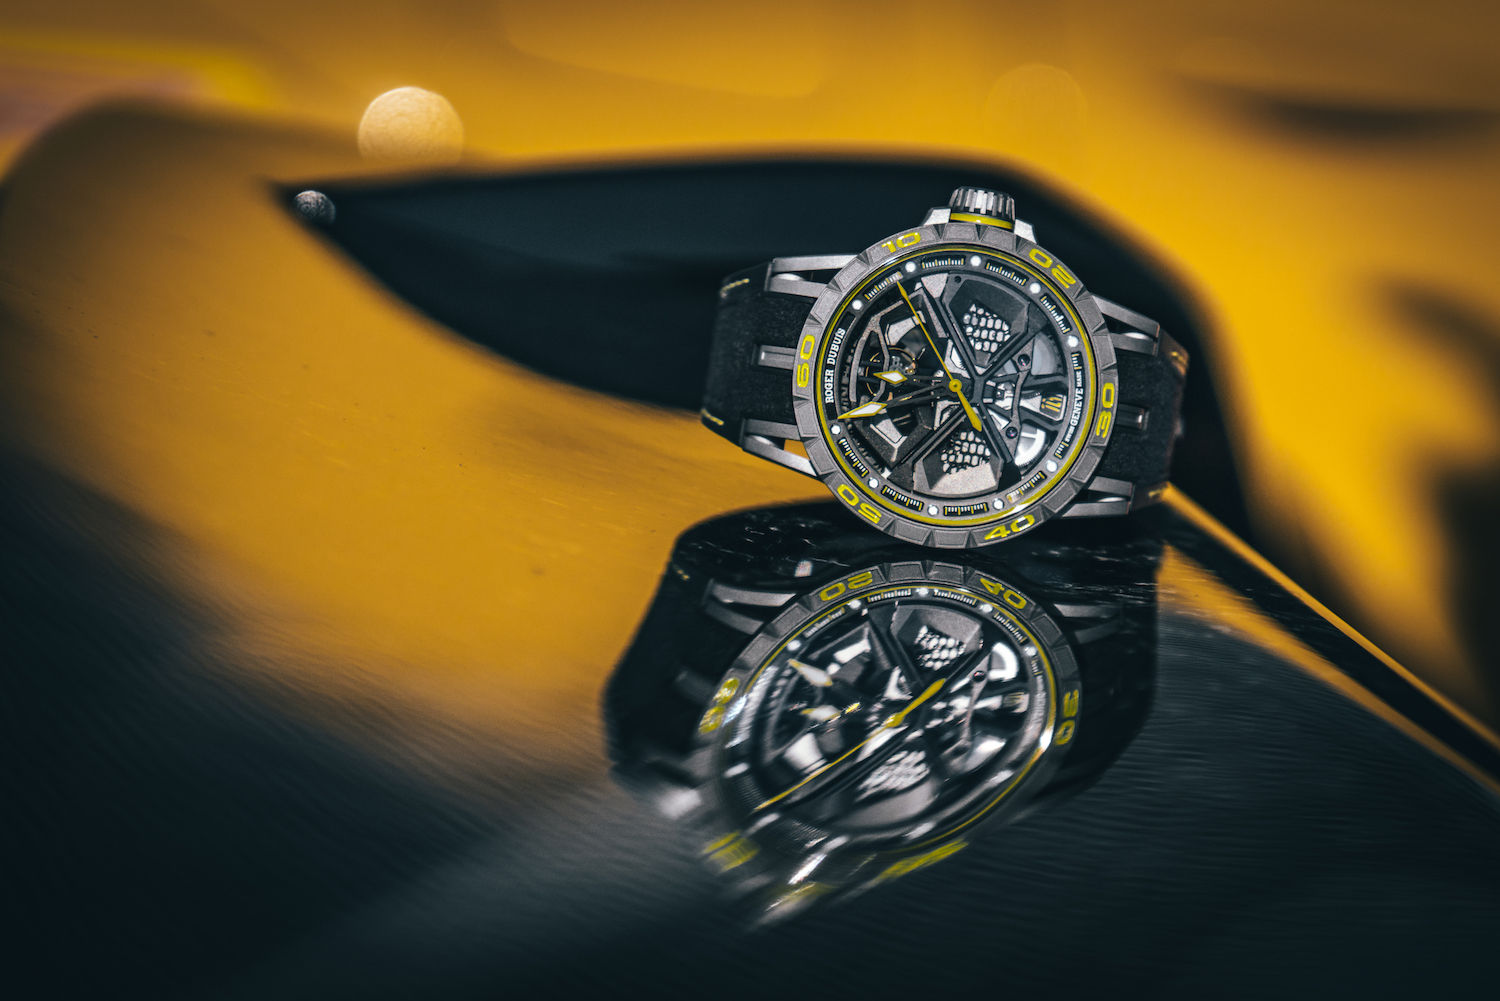 Roger Dubuis stands out in SIHH 2019 with exceptional novelties